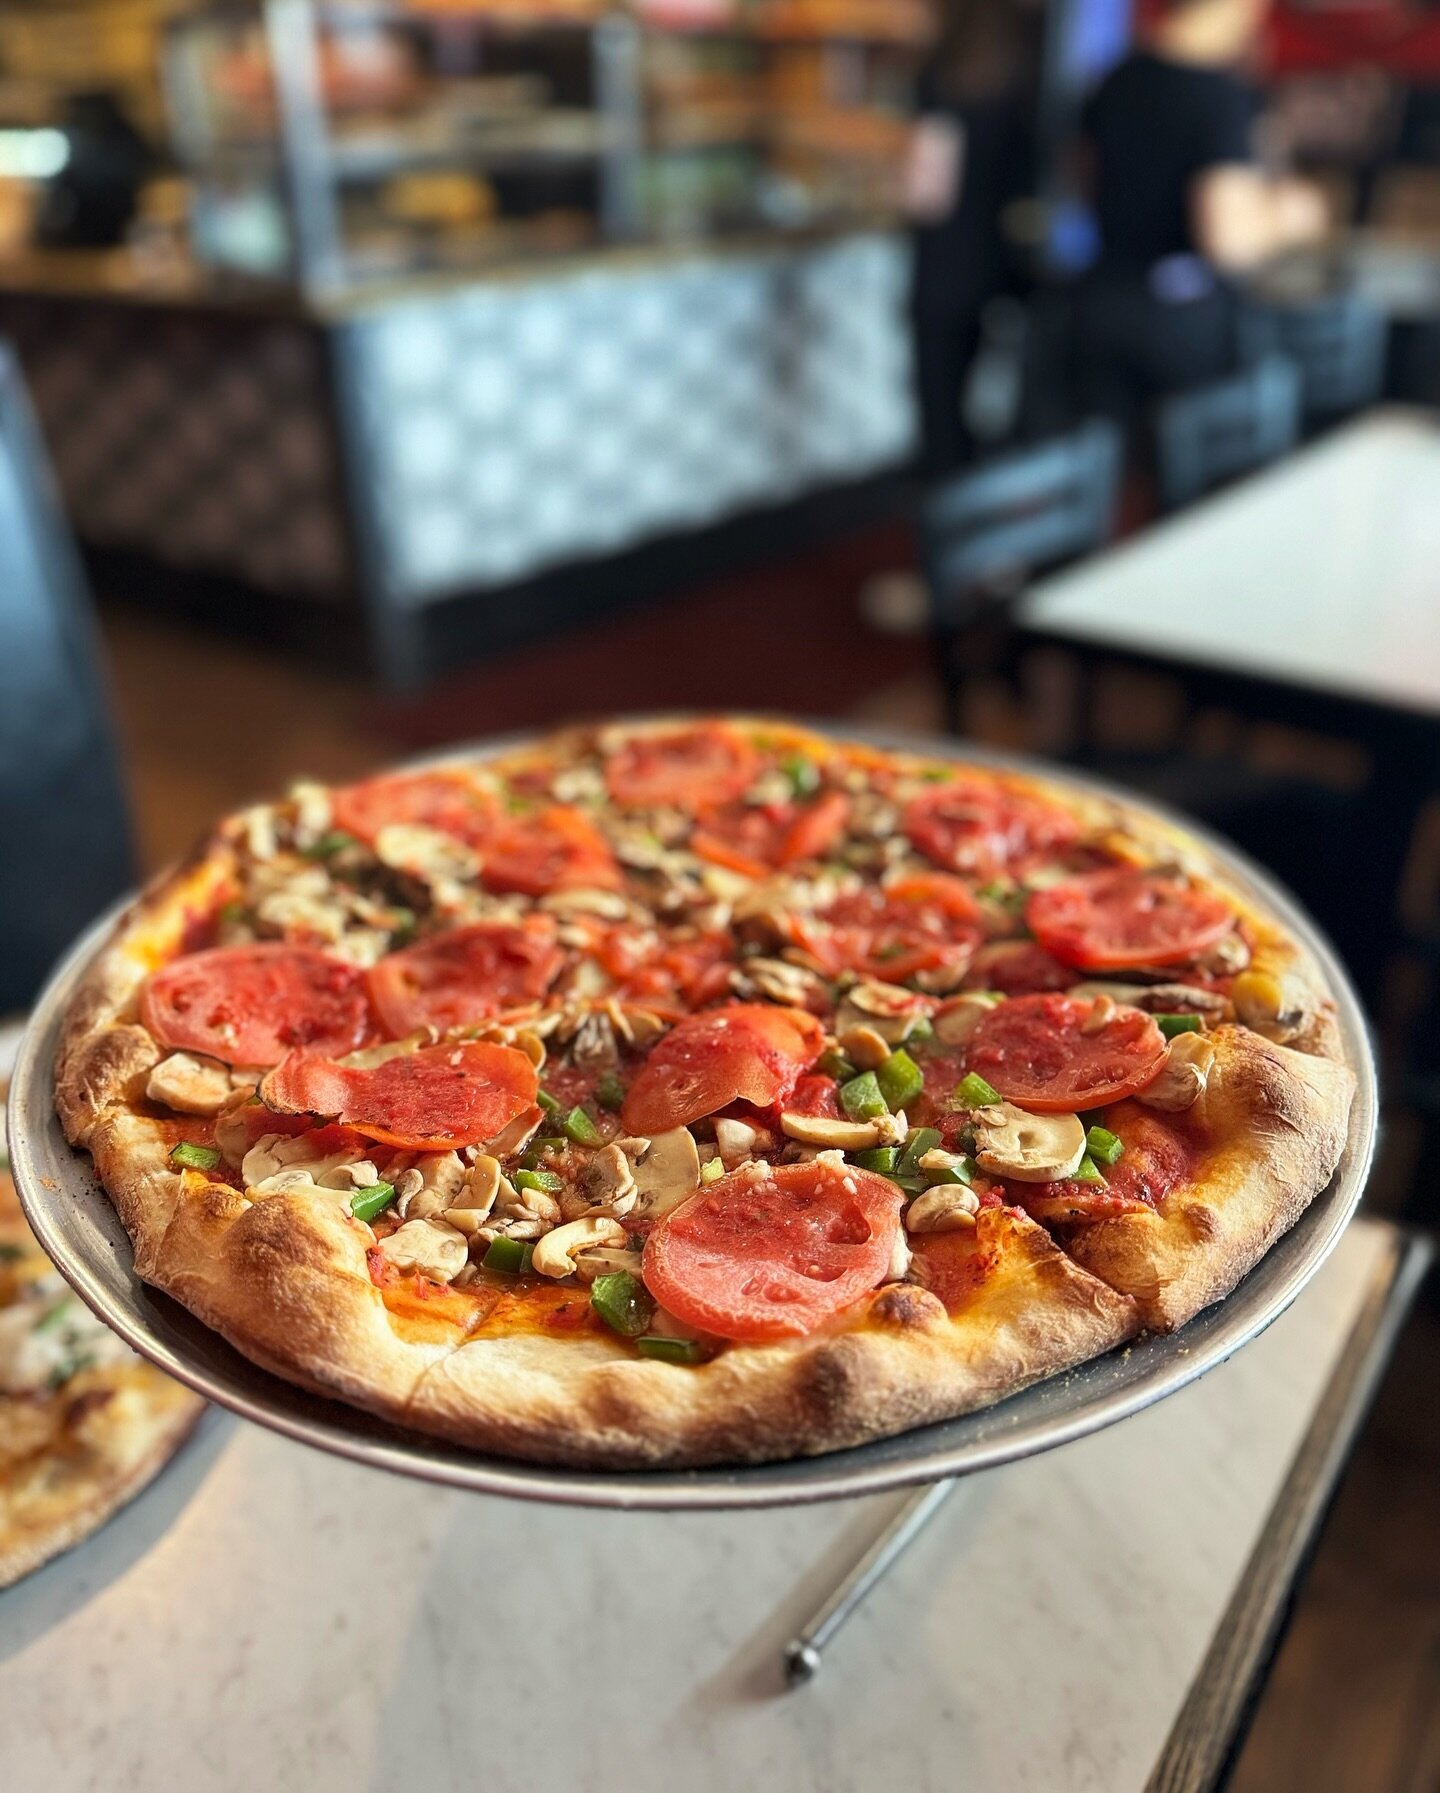 Is Pizza really Pizza without cheese? When we ask vegans what one thing they miss the most since going plant-based, the majority say &lsquo;a real Brooklyn style cheese pizza.&rsquo; Vegan cheese has come a long way, but has not yet reached the melty